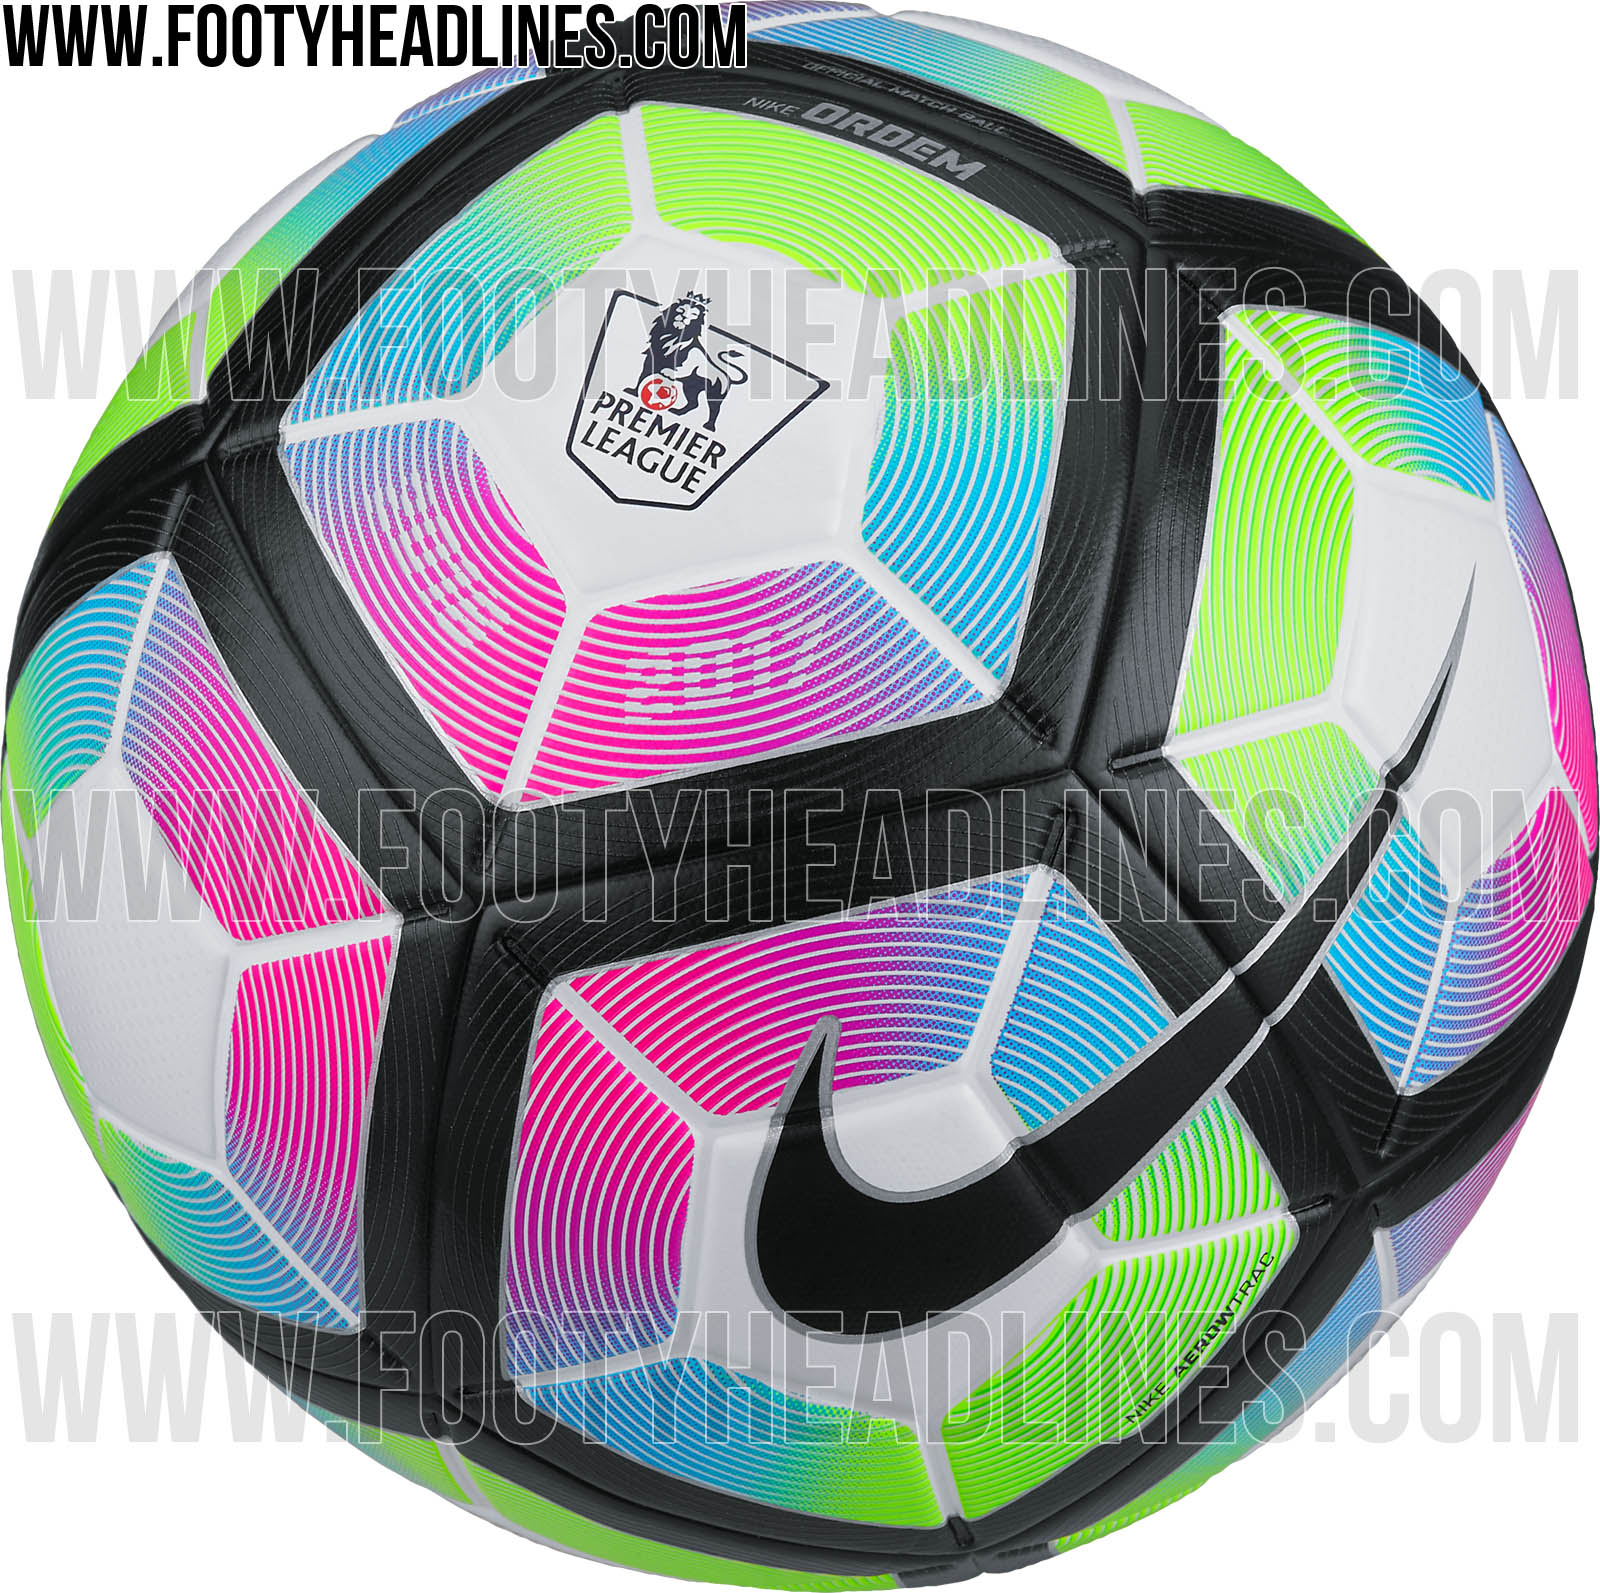 This is the new Nike Ordem 201617 Premier League Soccer Ball.